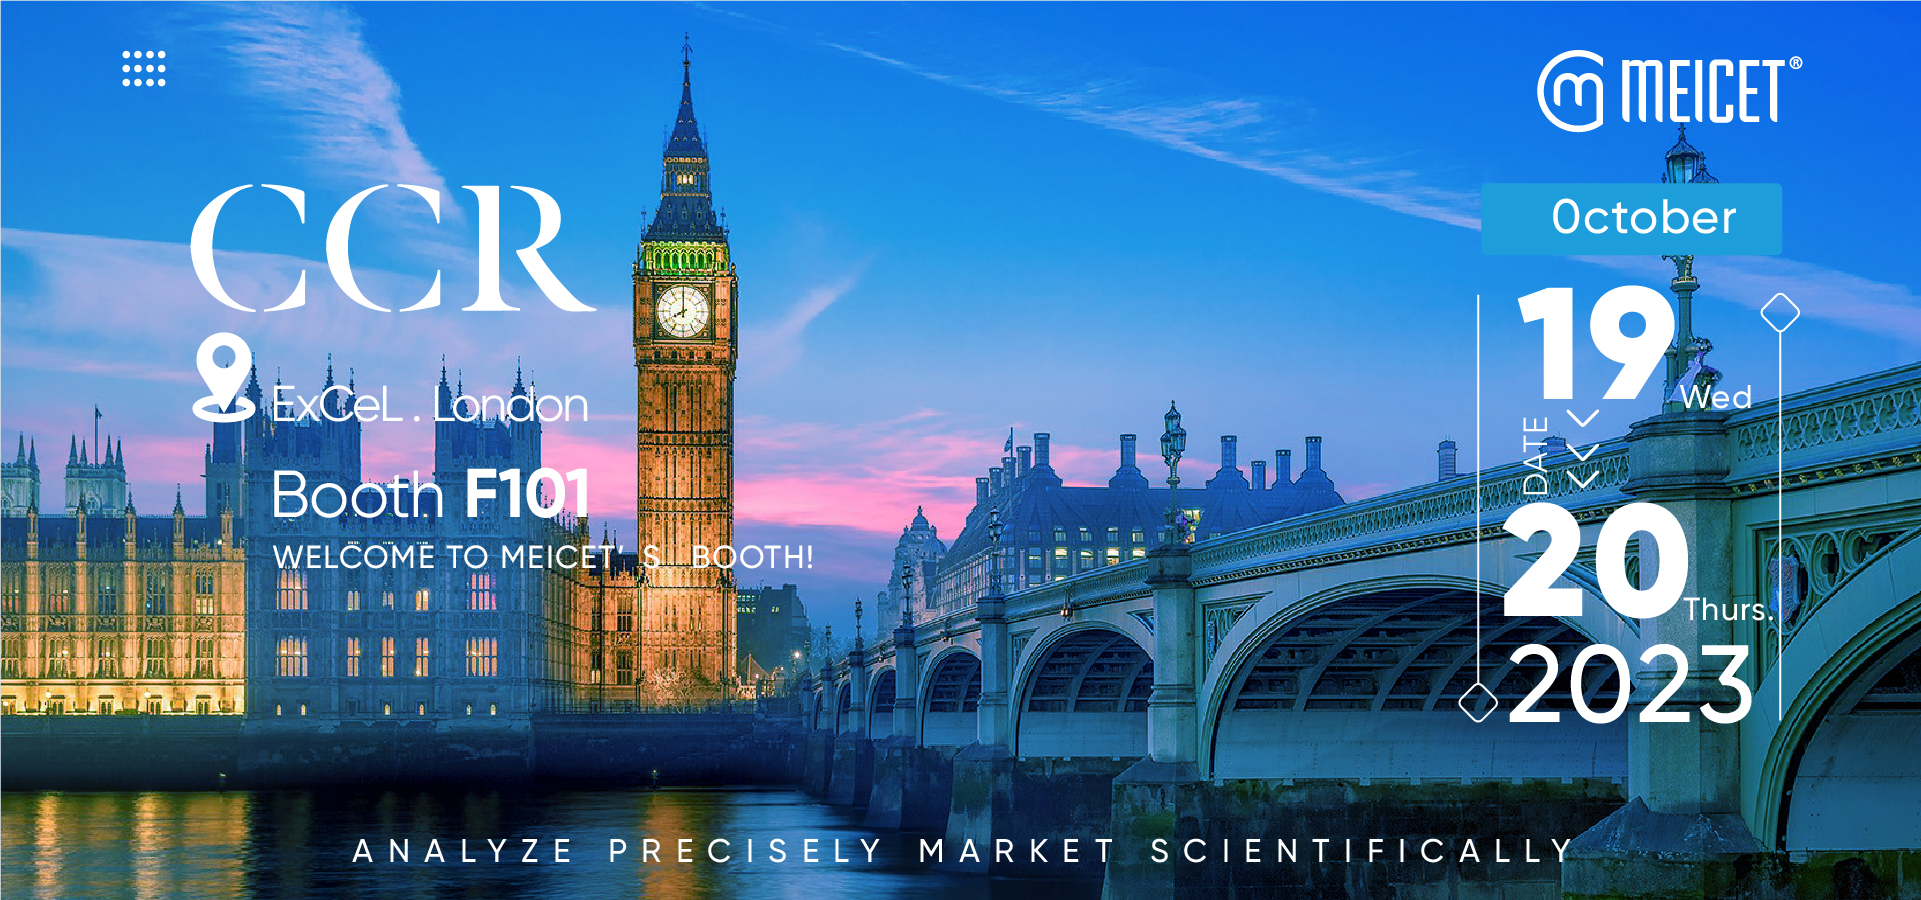 MEICET to Showcase Best-Selling Skin Analyzers at CCR Medical Aesthetics Exhibition in London